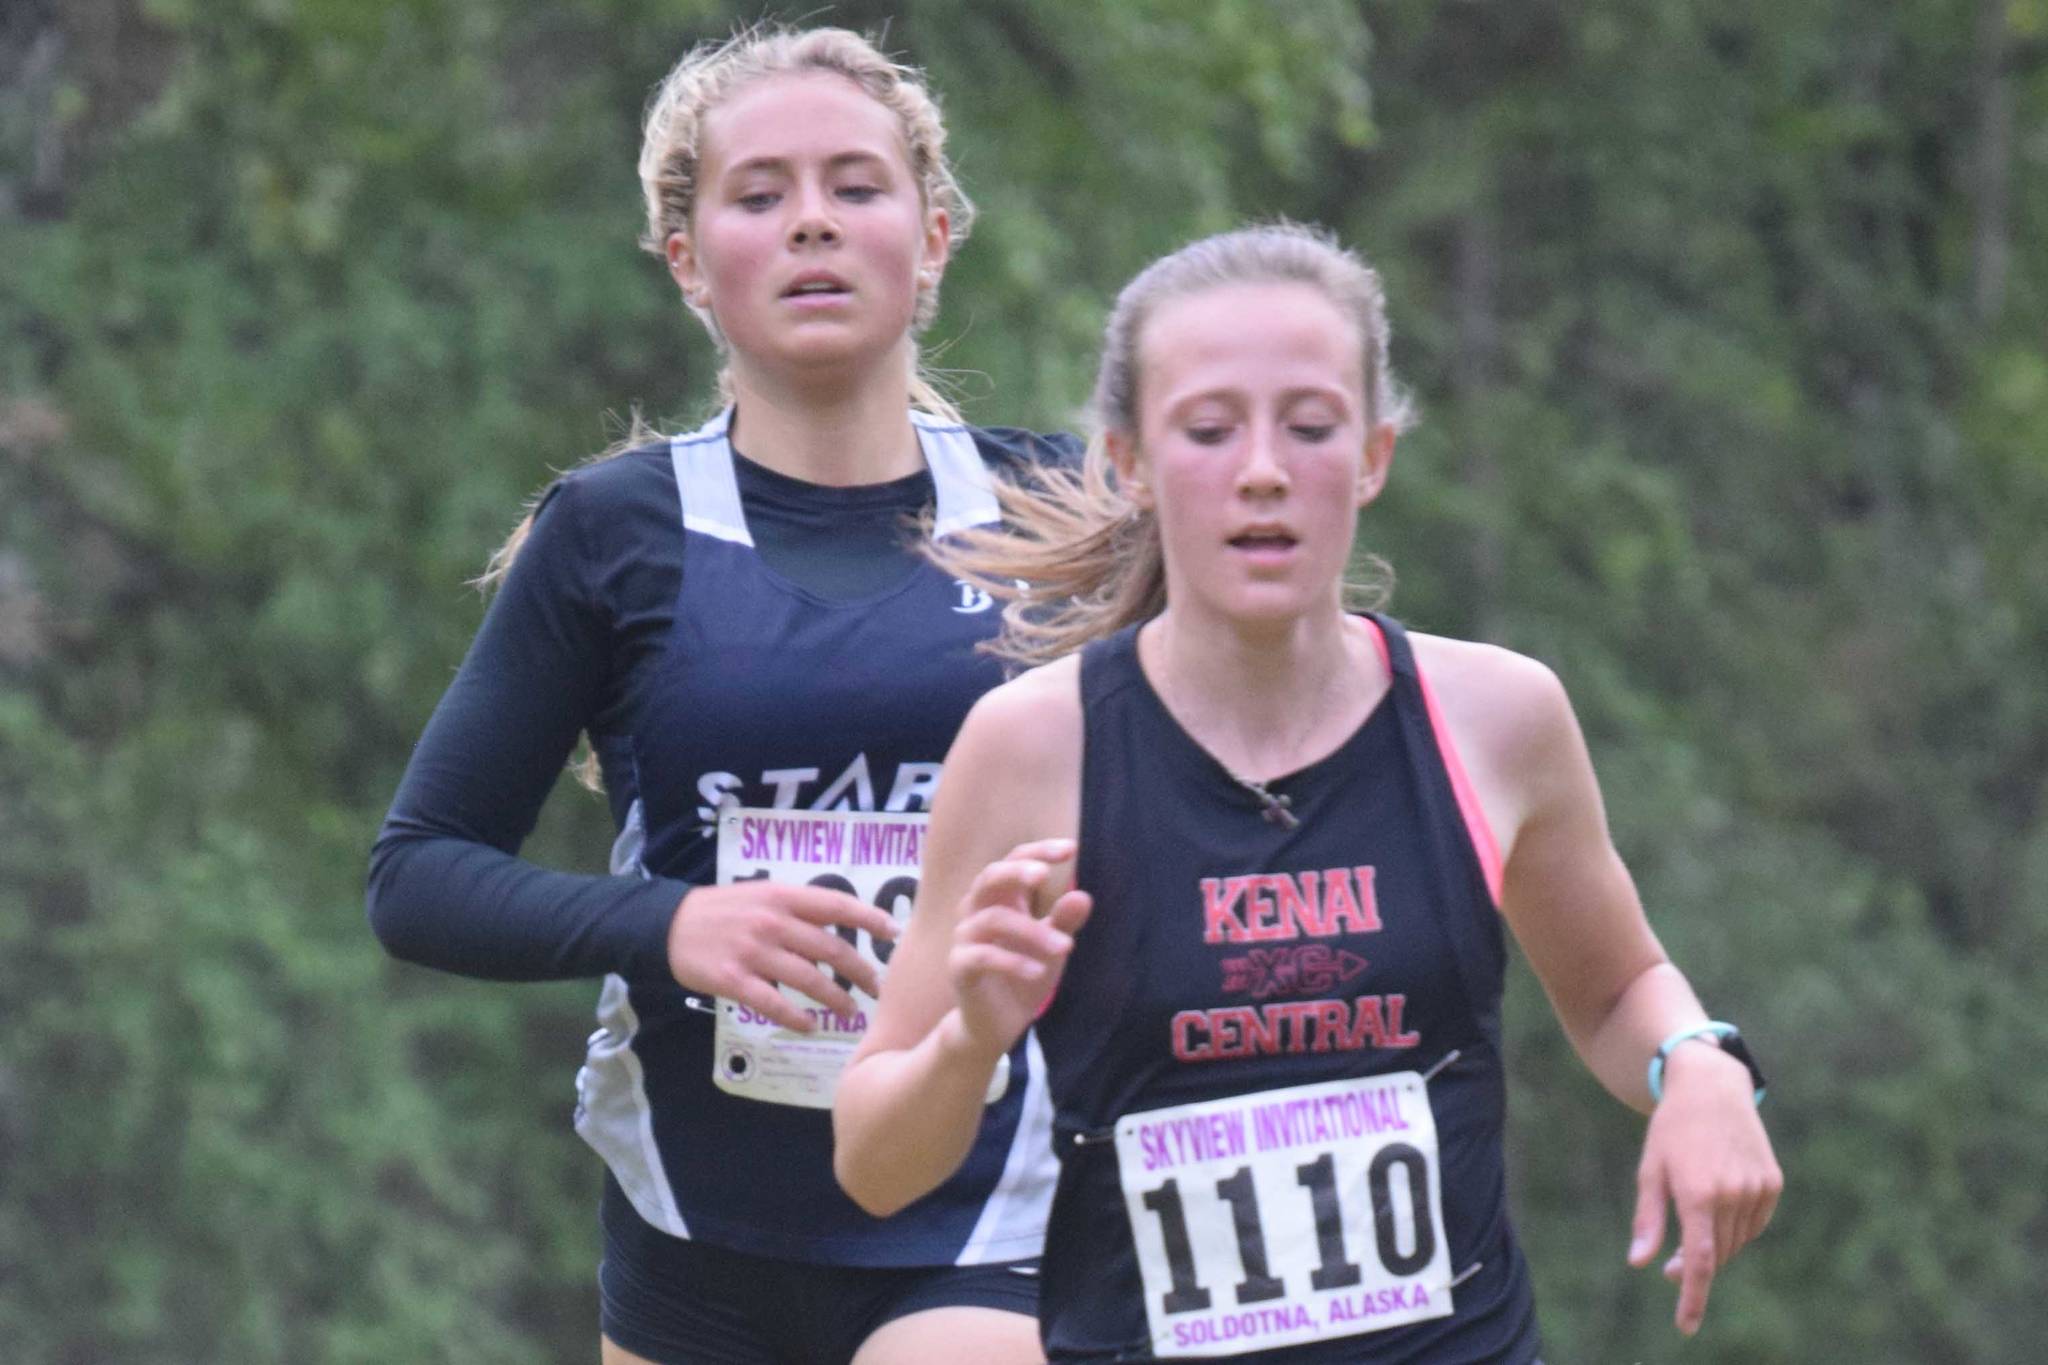 Soldotna's Jordan Strausbaugh tries to find a way around Kenai Central's Jayna Boonstra on Wednesday, Sept. 1, 2021, at the Kenai-Soldotna dual meet at Tsalteshi Trails just outside of Soldotna, Alaska. Boonstra was able to hang on for first place in the race. (Photo by Jeff Helminiak/Peninsula Clarion)